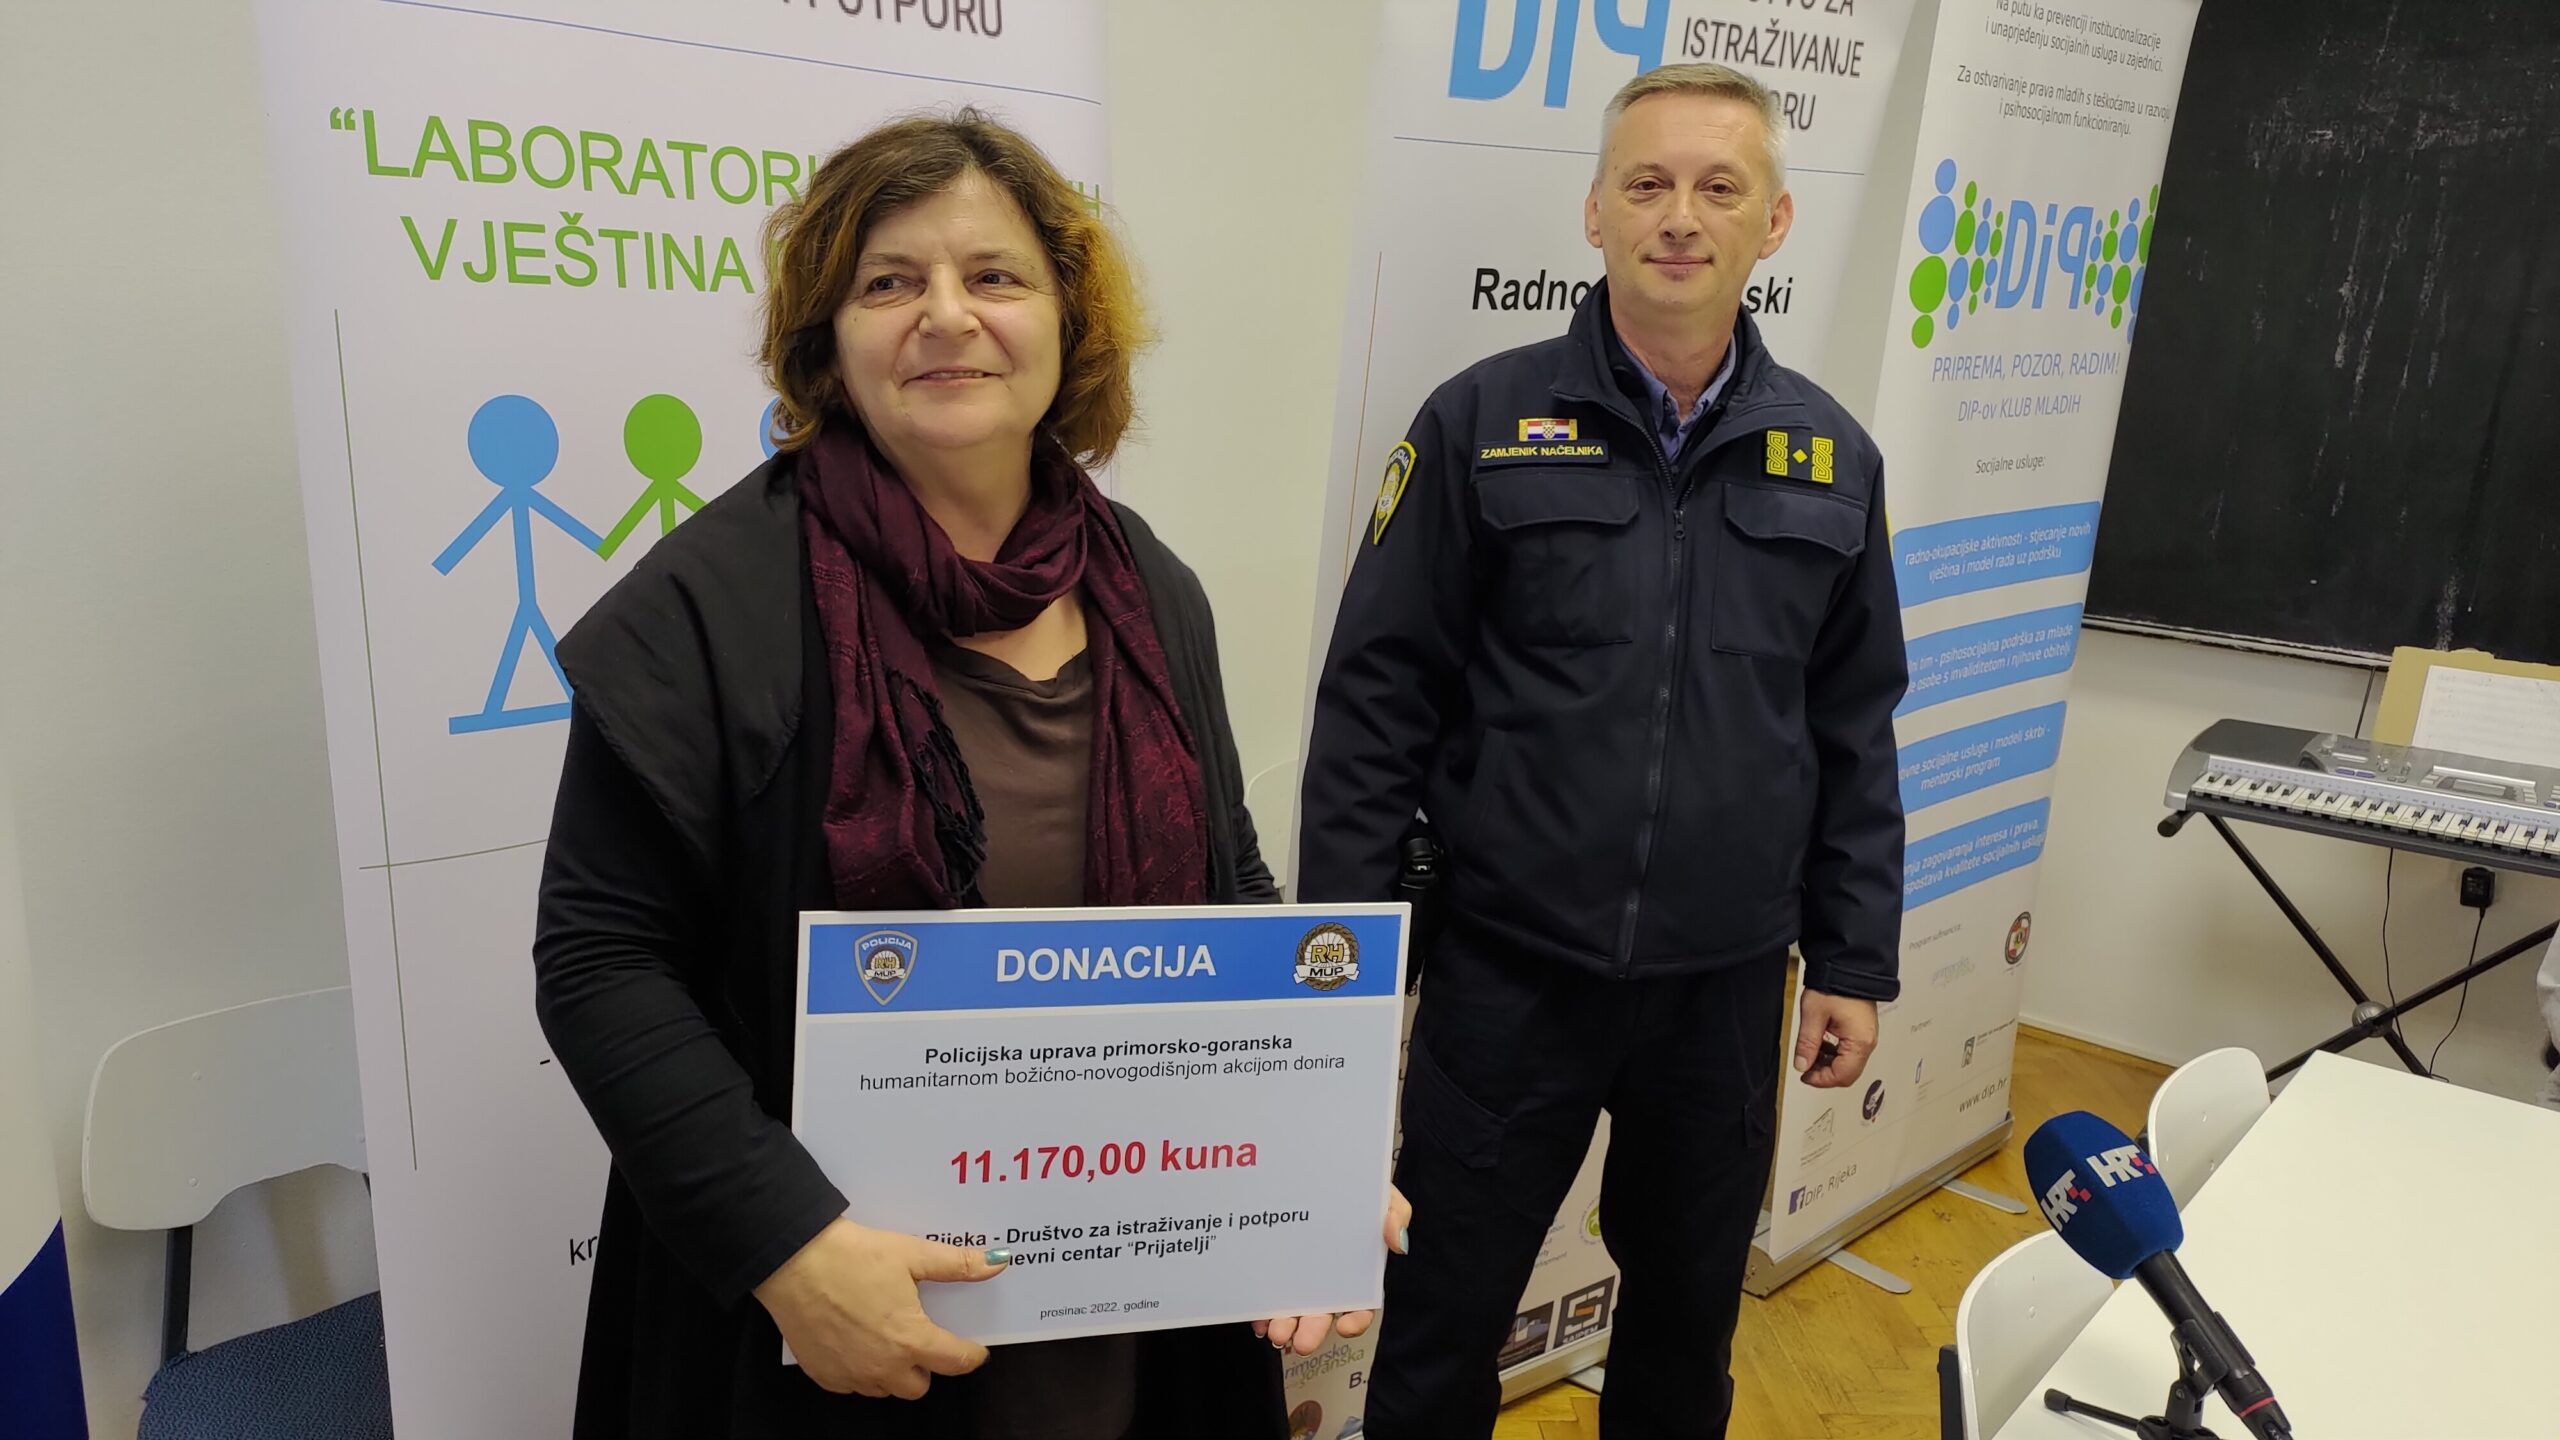 Employees of the Police Department of the Primorsko-goranska County collected funds for the DIP’s kitchen